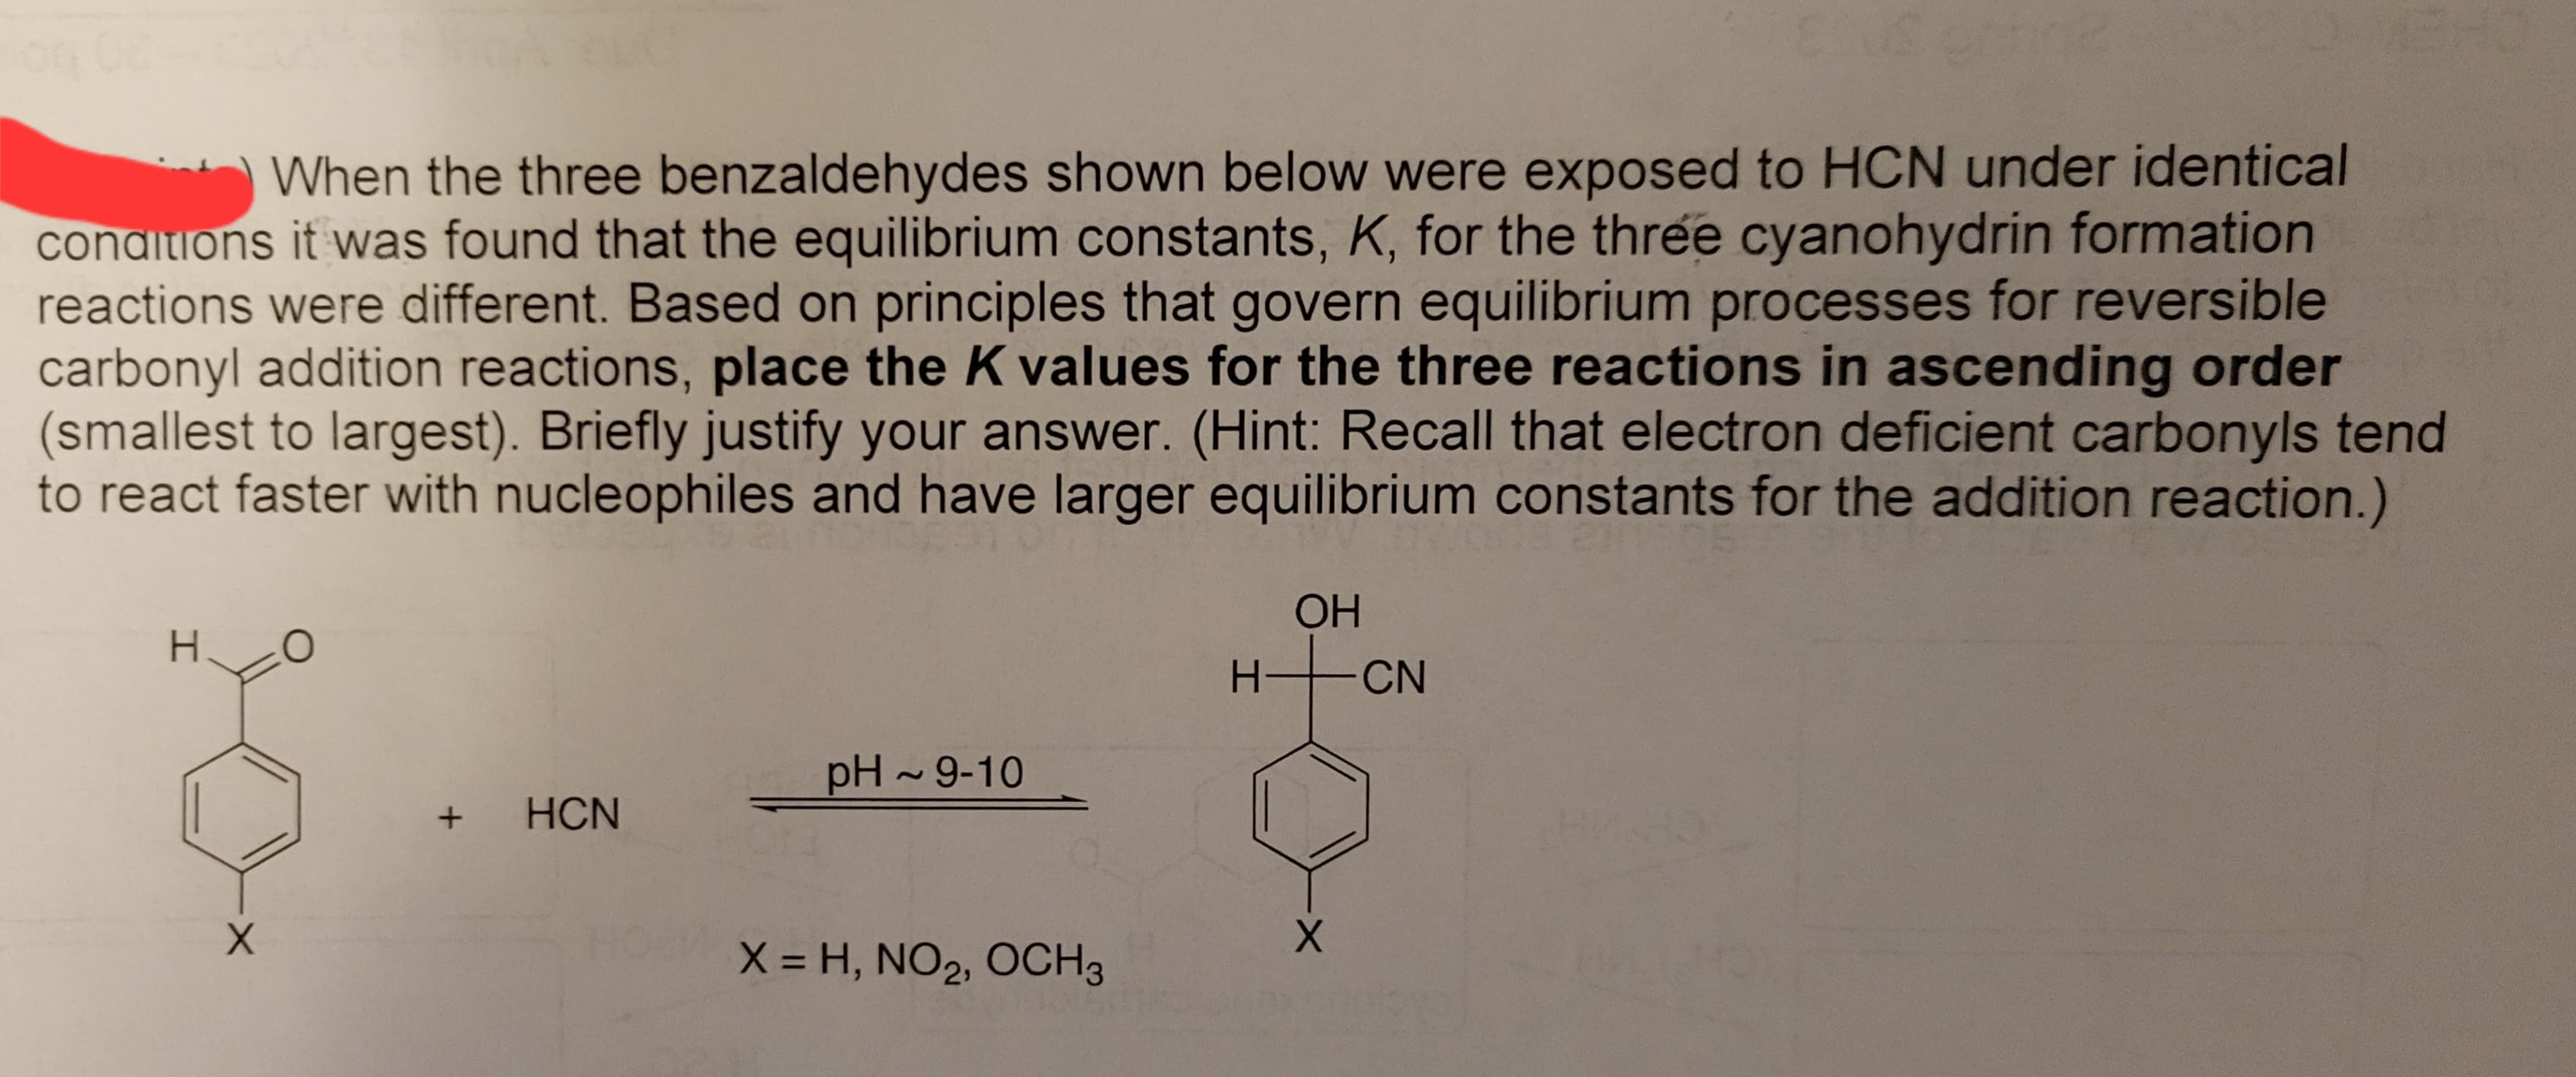 When the three benzaldehydes shown below were exposed to HCN under identical
conditions it was found that the equilibrium constants, K, for the three cyanohydrin formation
reactions were different. Based on principles that govern equilibrium processes for reversible
carbonyl addition reactions, place the K values for the three reactions in ascending order
(smallest to largest). Briefly justify your answer. (Hint: Recall that electron deficient carbonyls tend
to react faster with nucleophiles and have larger equilibrium constants for the addition reaction.)
H
X
O
+ HCN
pH ~ 9-10
X = H, NO₂, OCH 3
OH
H+CN
X